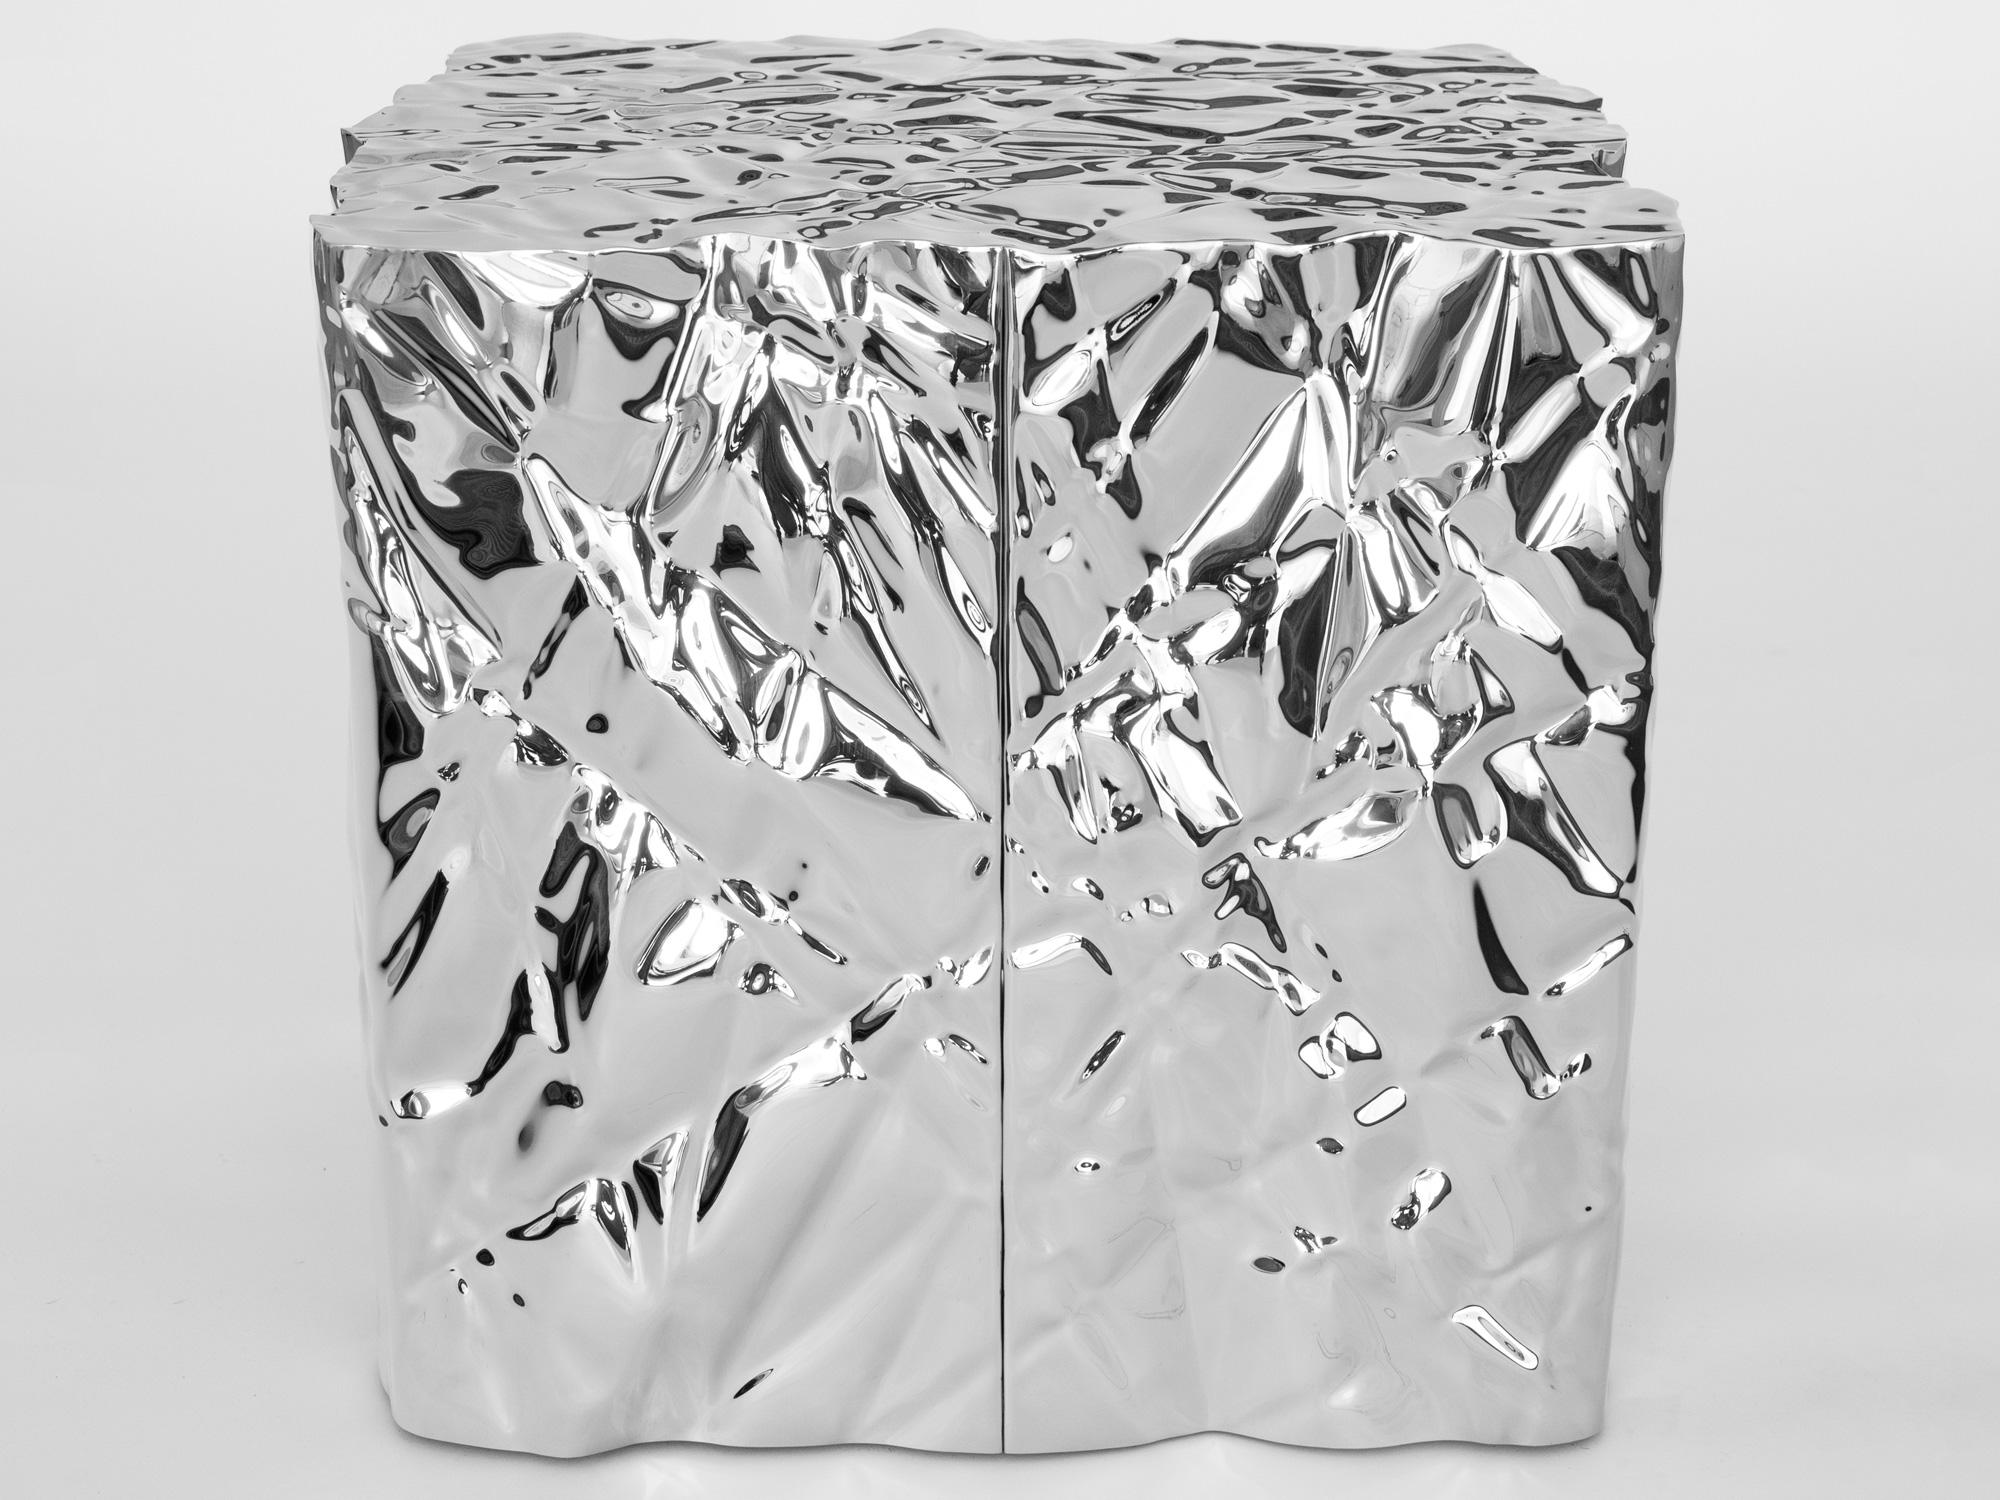 Christopher Prinz “Wrinkled Cube Table” in Mirror Polished Stainless Steel For Sale 1